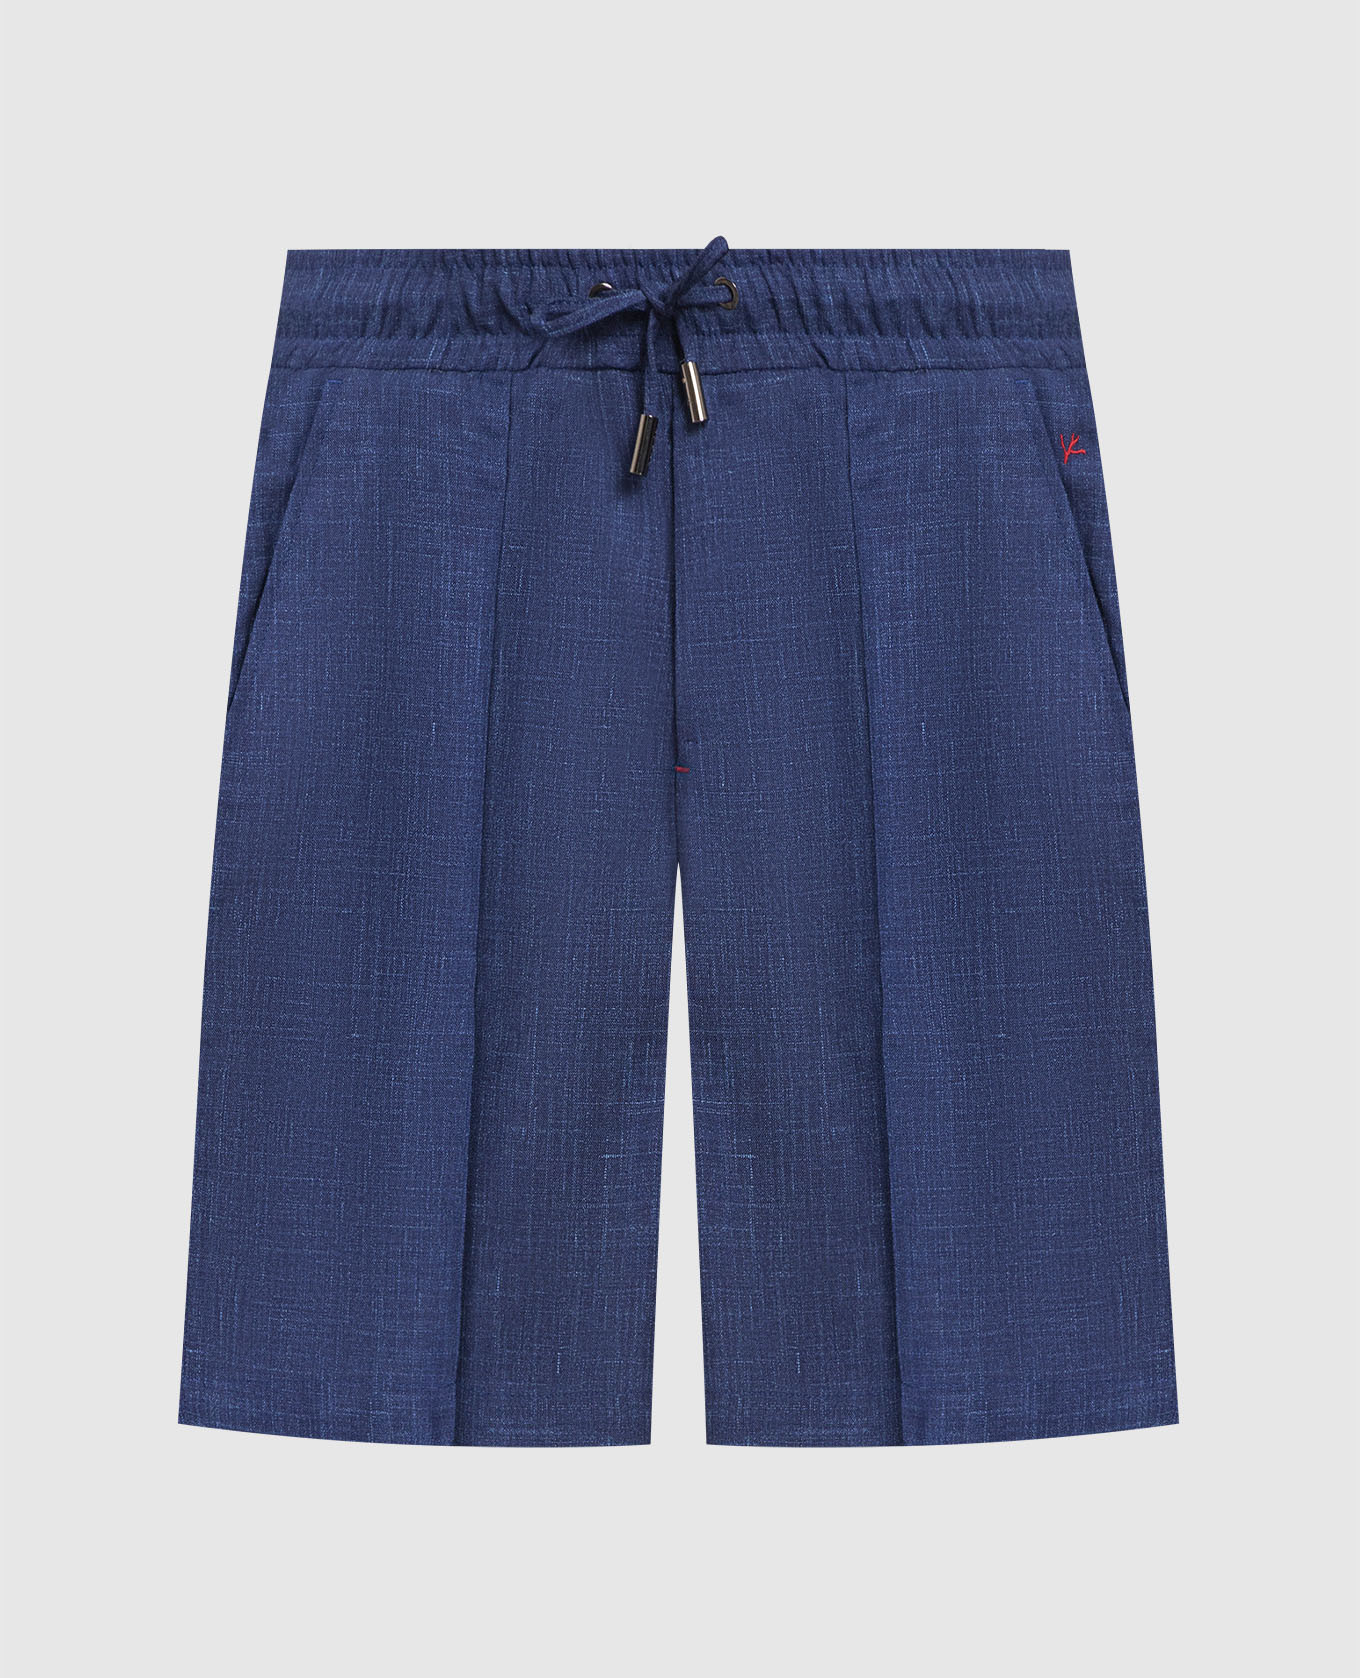 Blue shorts made of wool, silk and linen